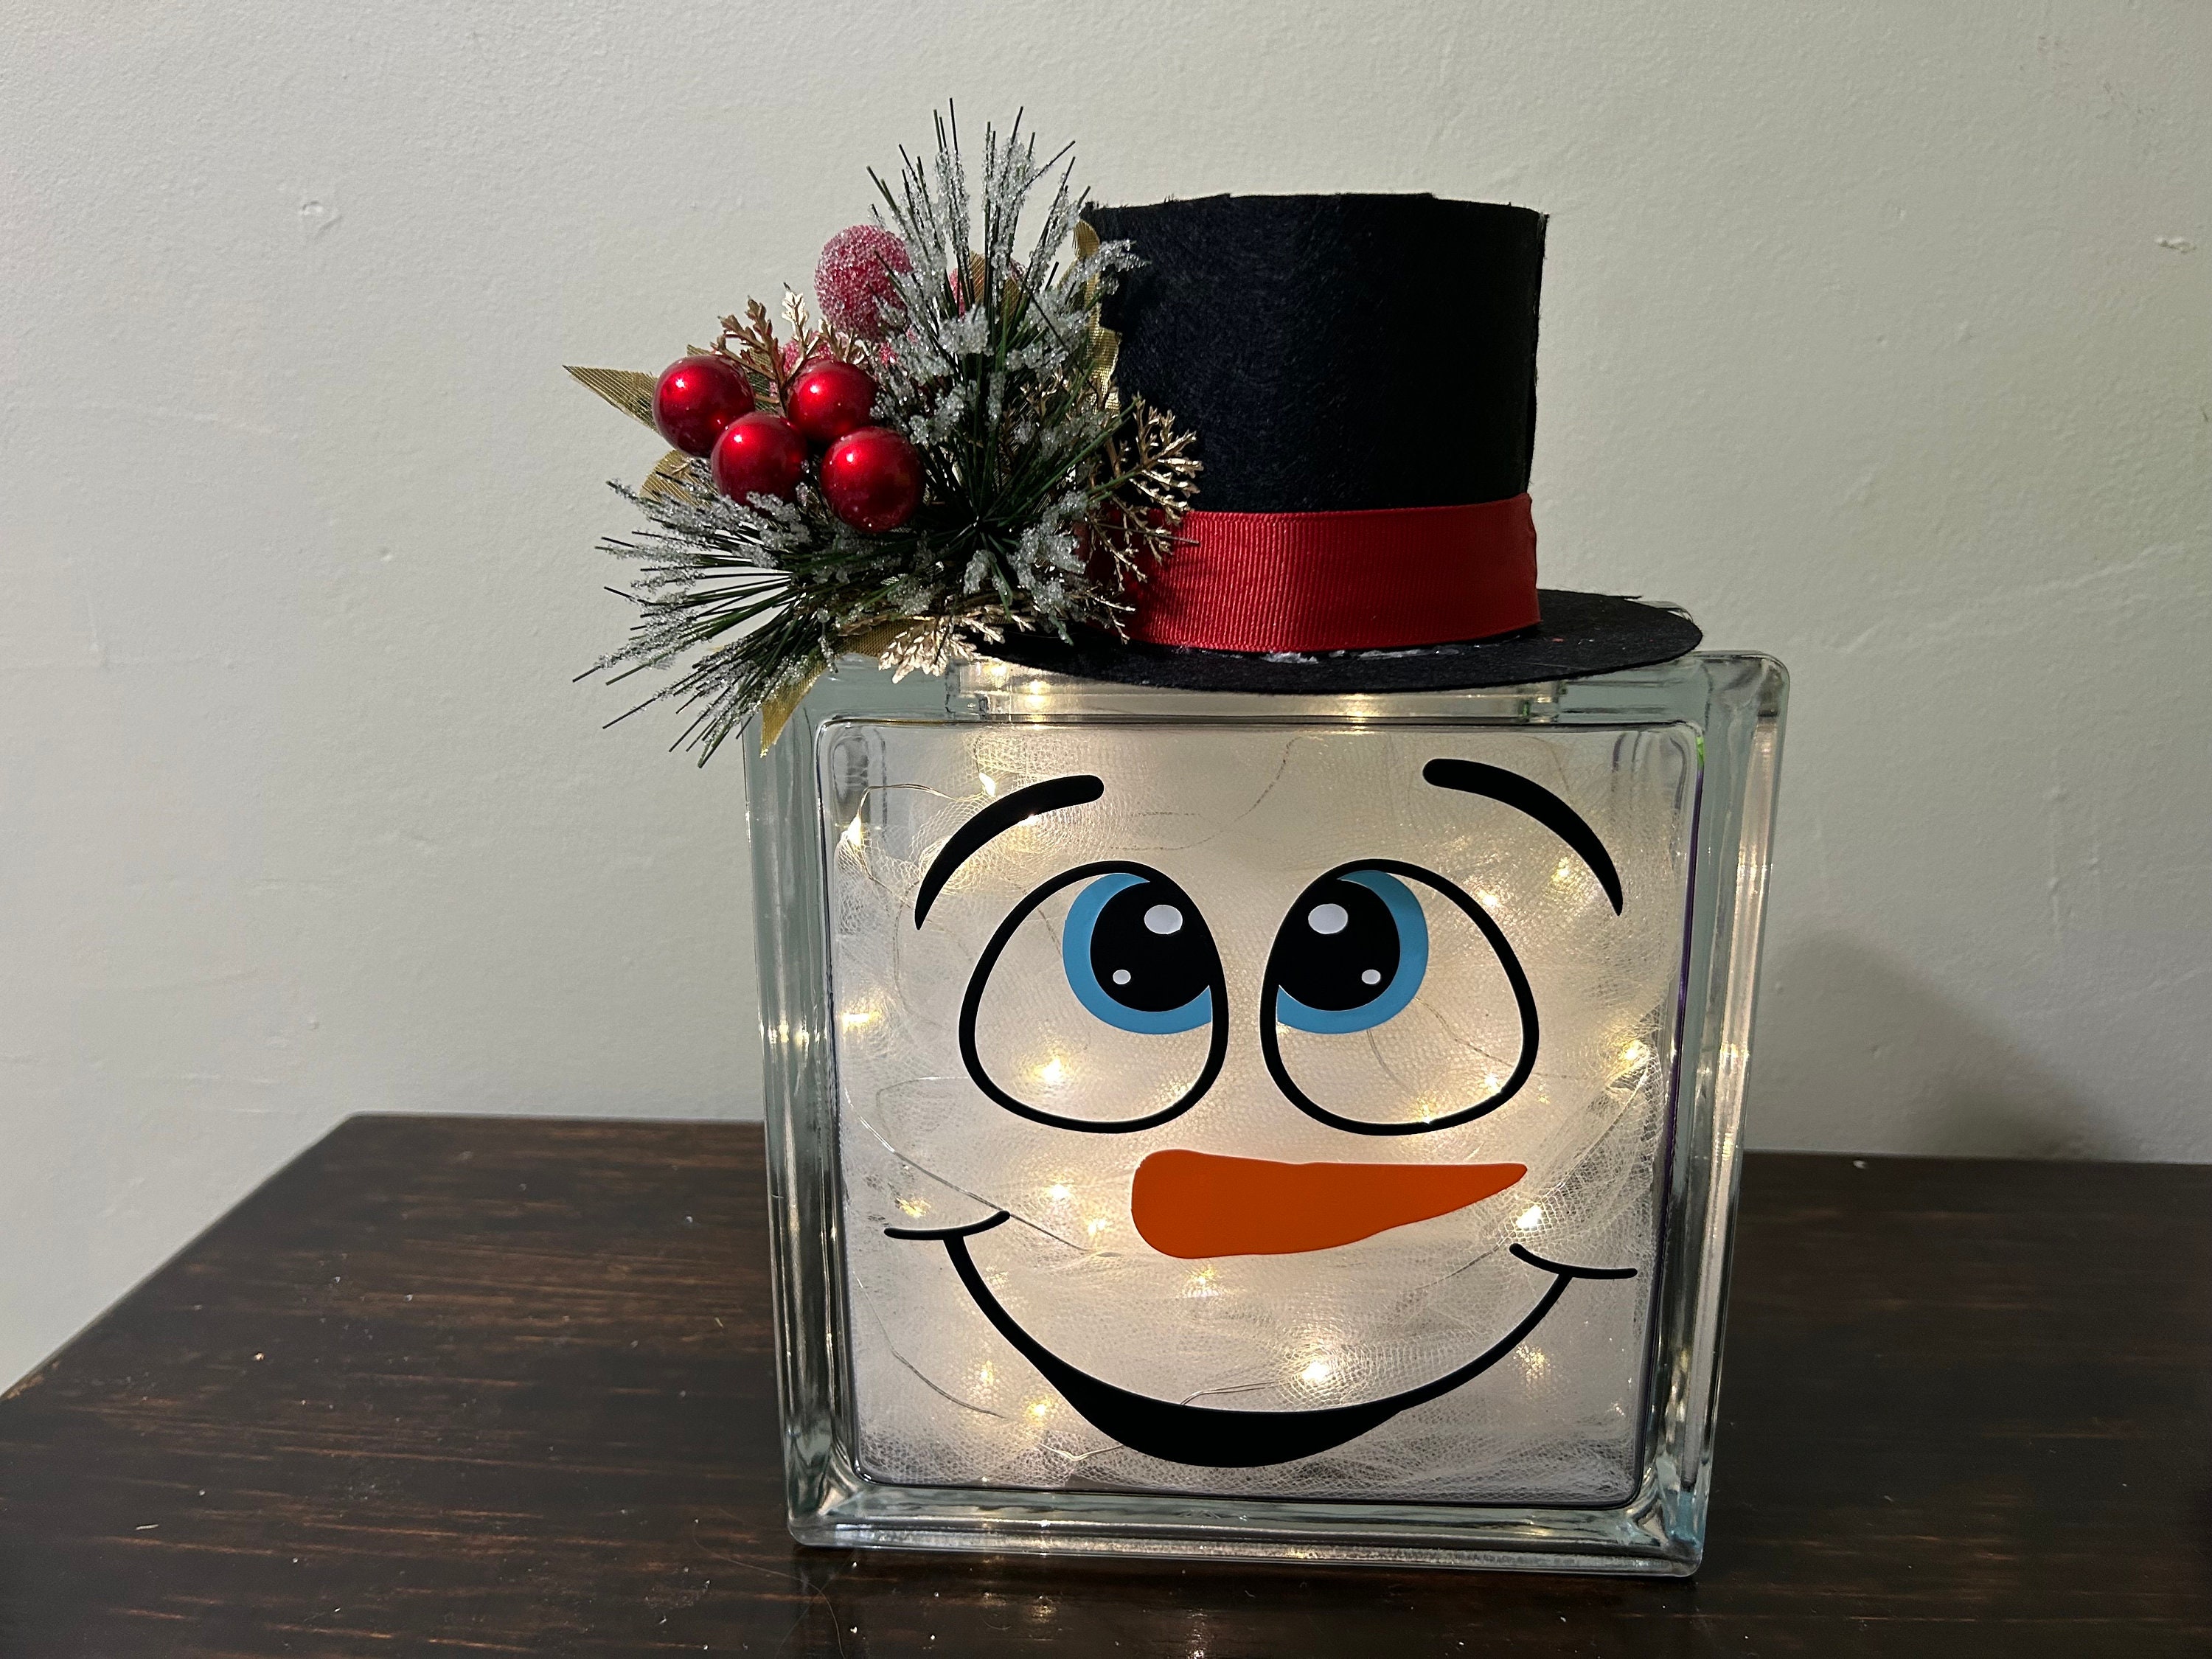 REDI2CRAFT Holiday Art Series 7.5 in. x 7.5 in. x 3.125 in. Wave Glass Block for Arts and Crafts with Snowman Theme